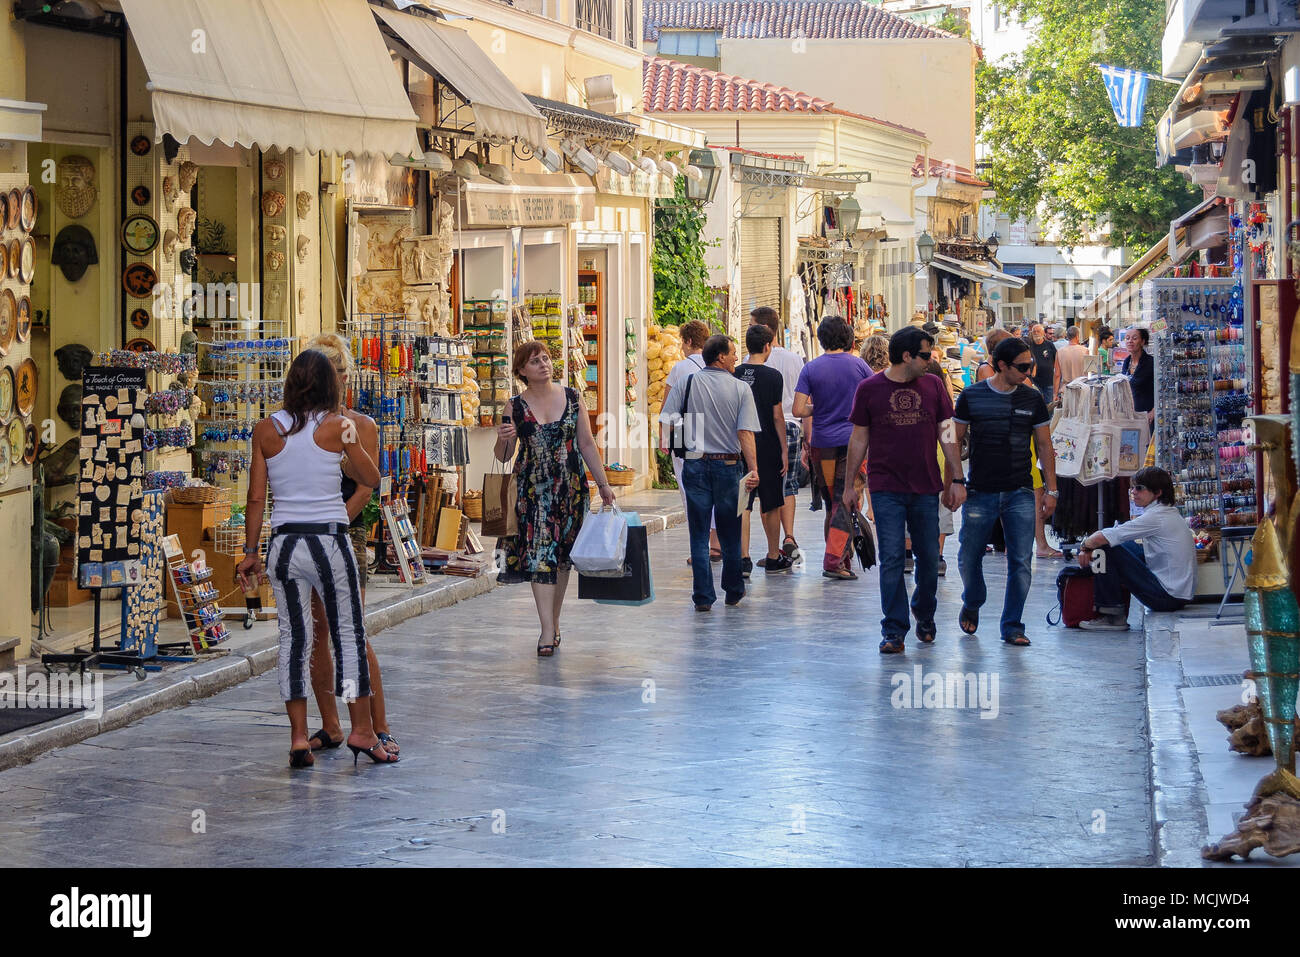 Tourists shop and stroll in the narrow cobblestone streets of Plaka - Athens, Greece Stock Photo